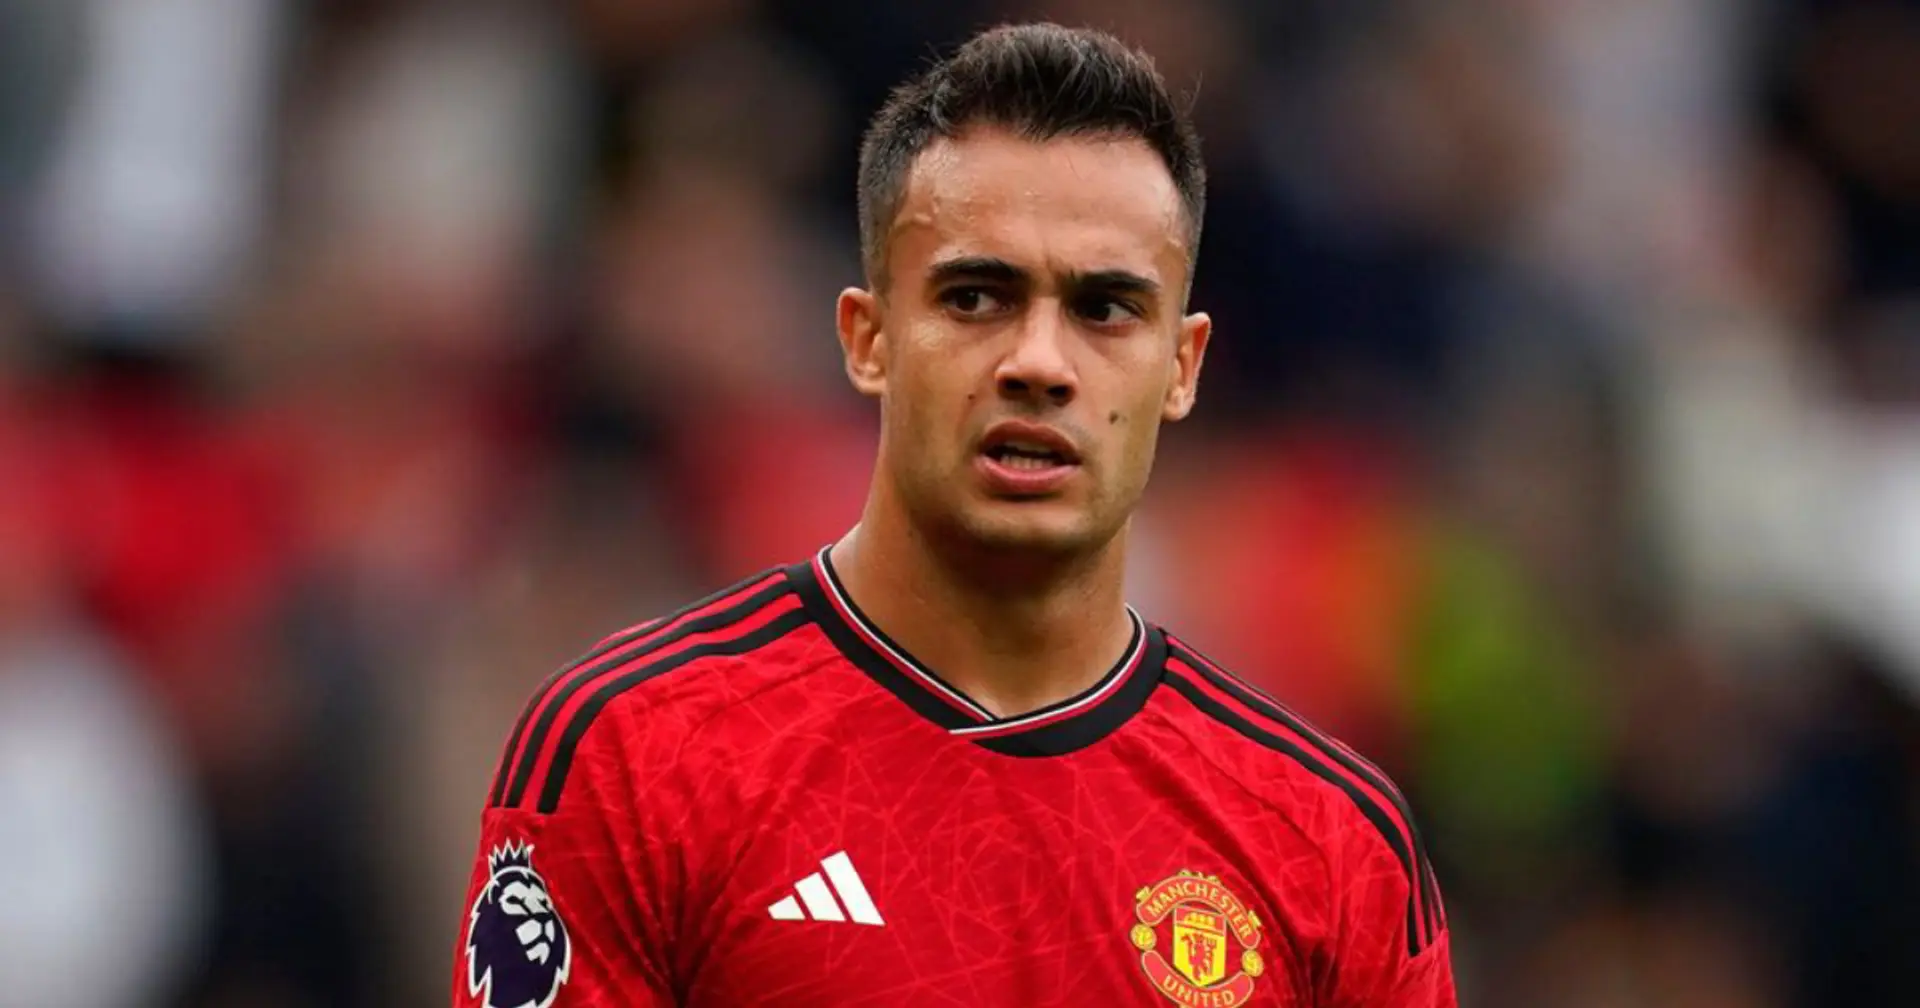 'Sir Jim's cost cutting begins': Man United fans react to Sergio Reguilon's exit